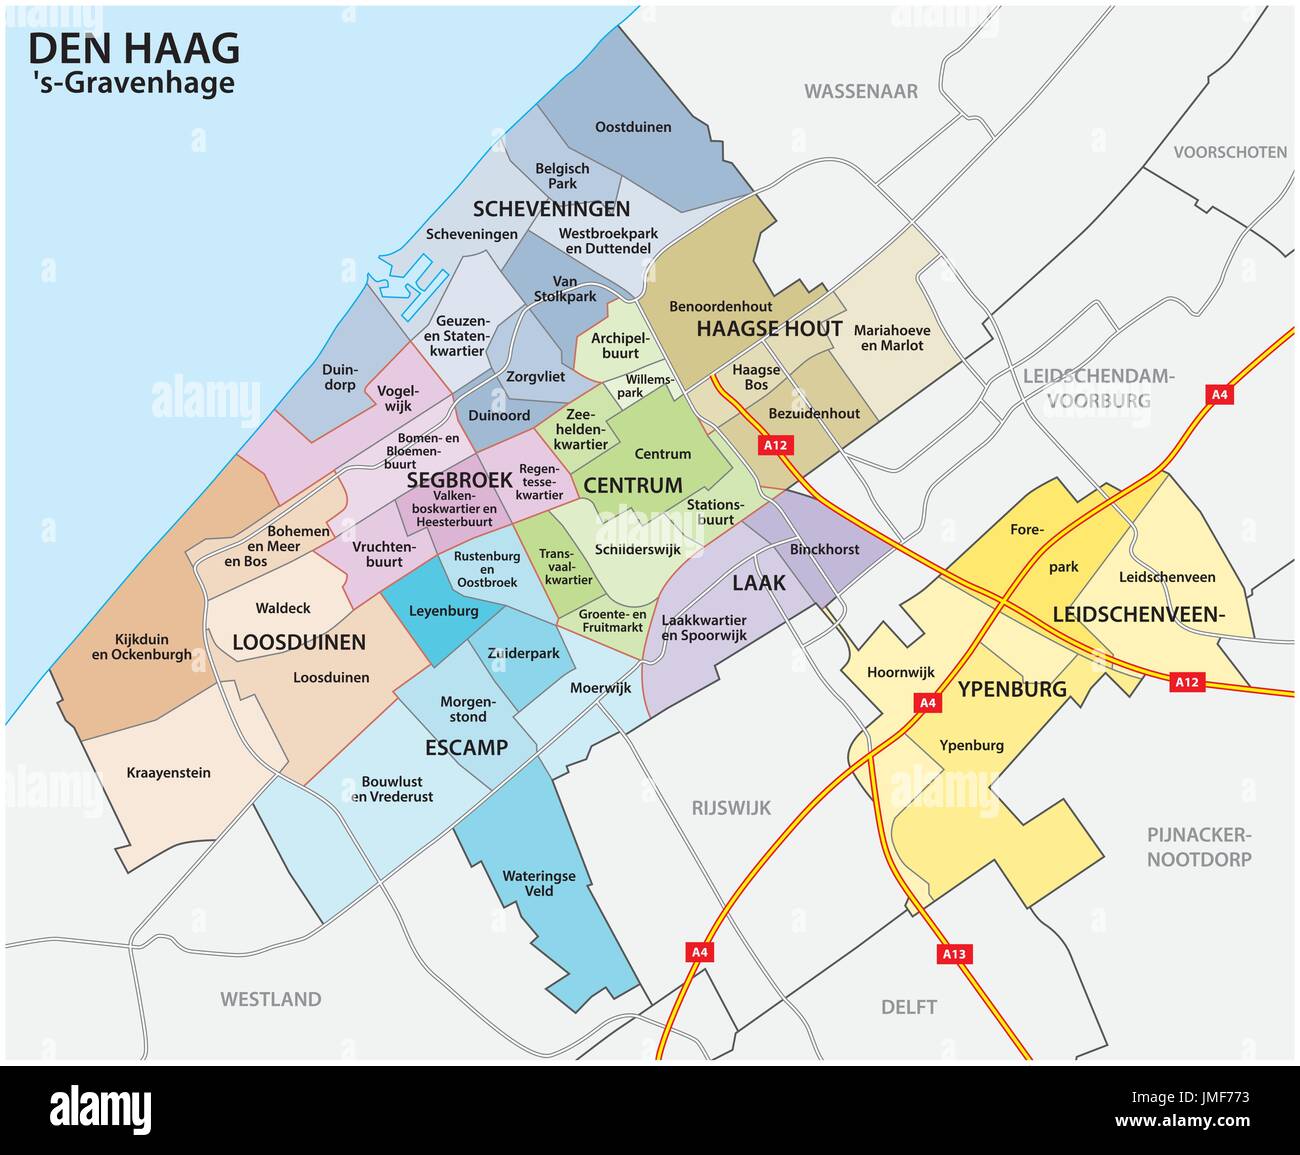 Administrative And Political Map Of The Dutch City The Hague JMF773 